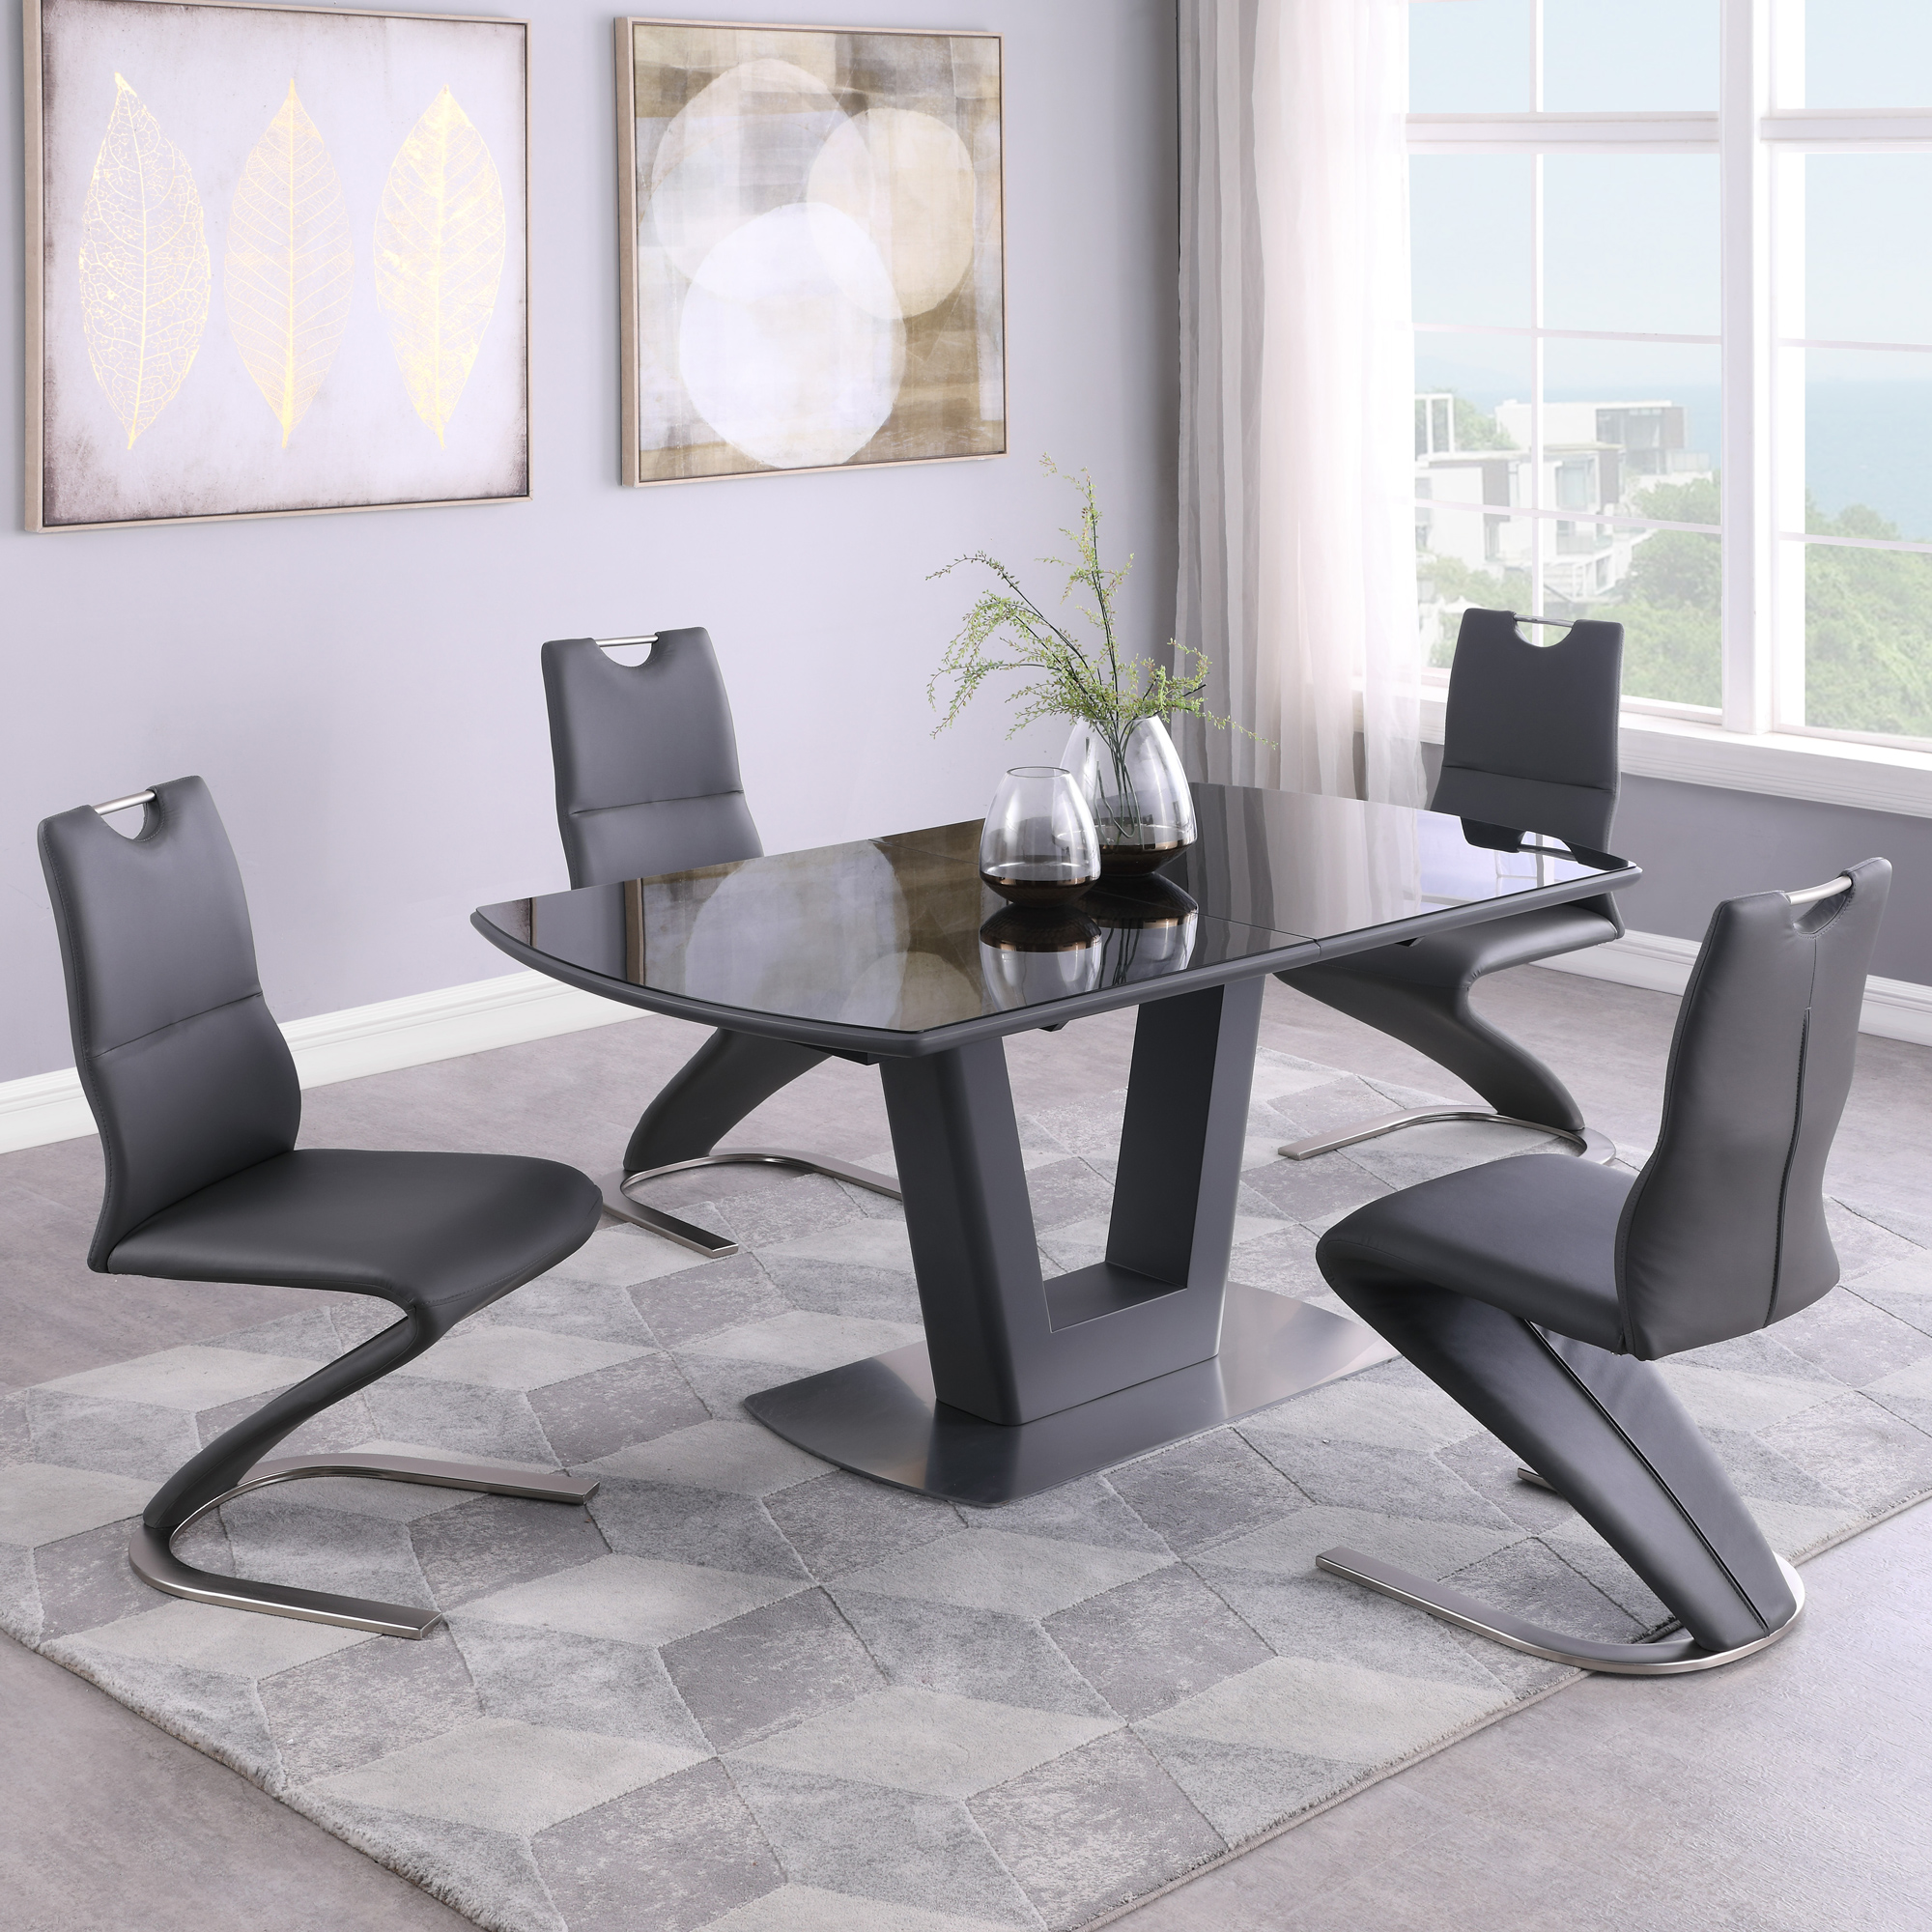 https://www.homethreads.com/files/chintaly/suri-5pc-contemporary-dining-set-extendable-glass-table-z-shaped-chairs-1.jpg